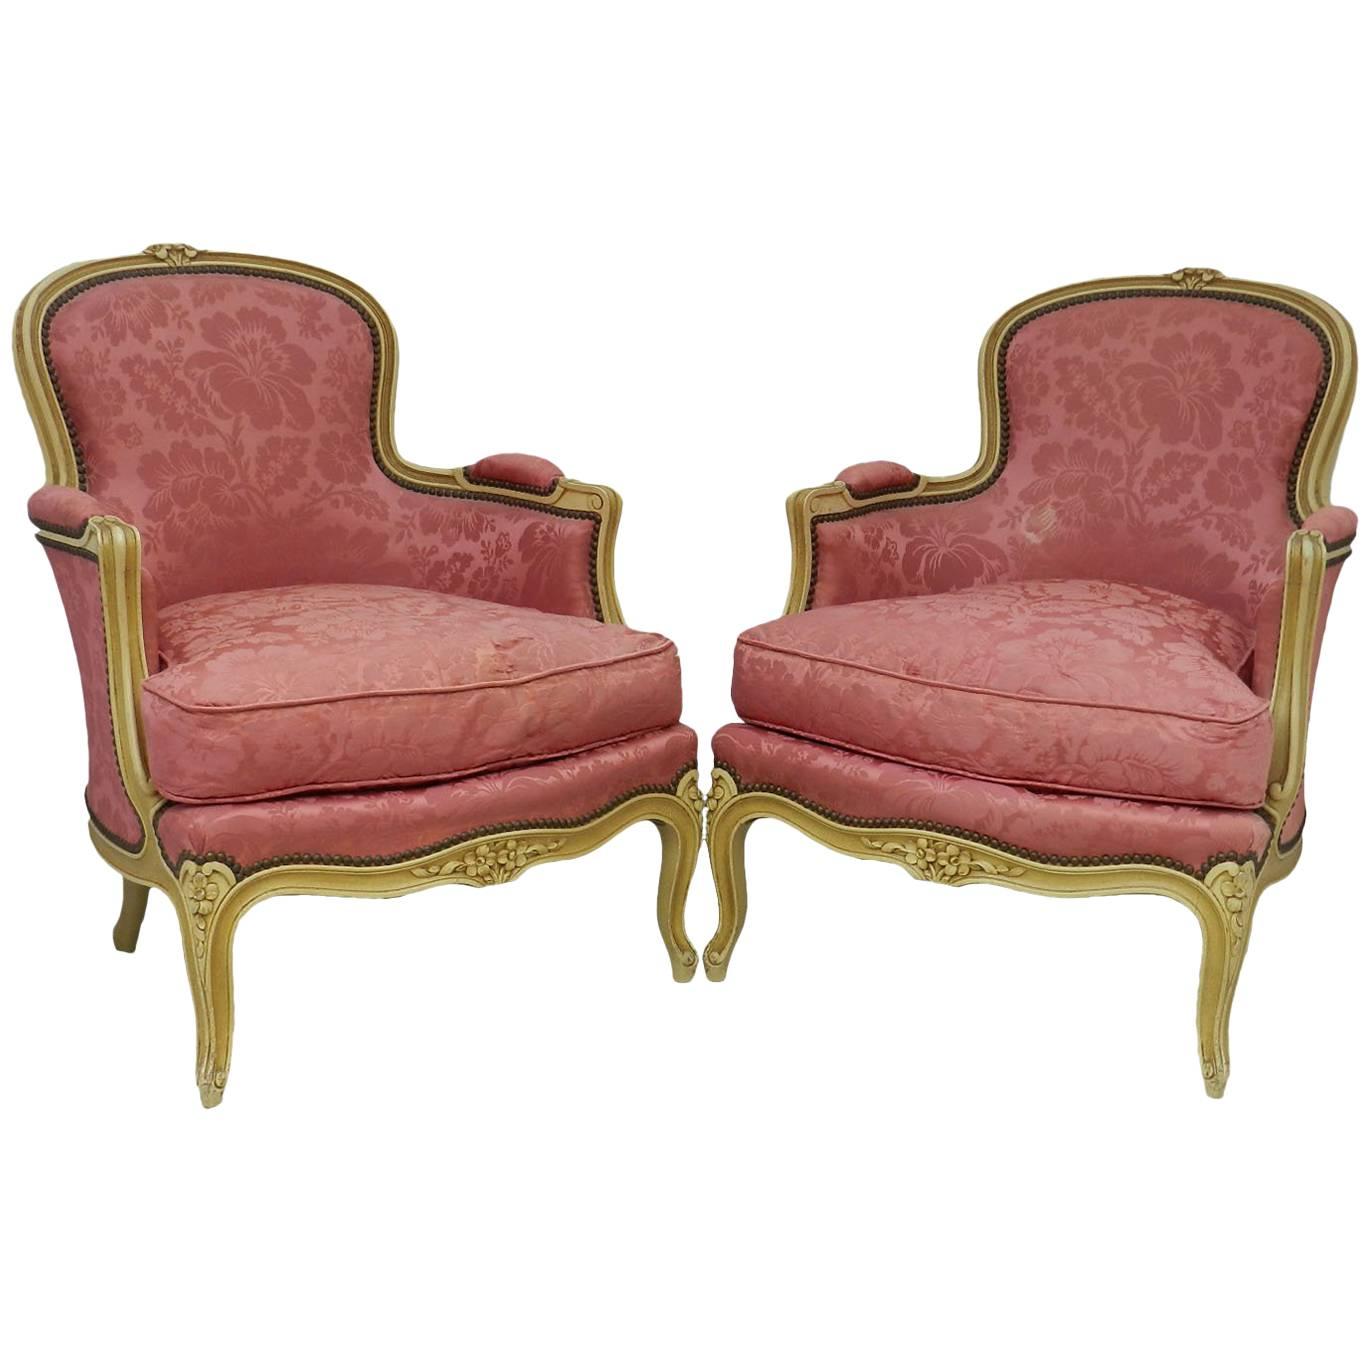 Pair of French Bergere Armchairs Louis Style, Early 20th Century to recover